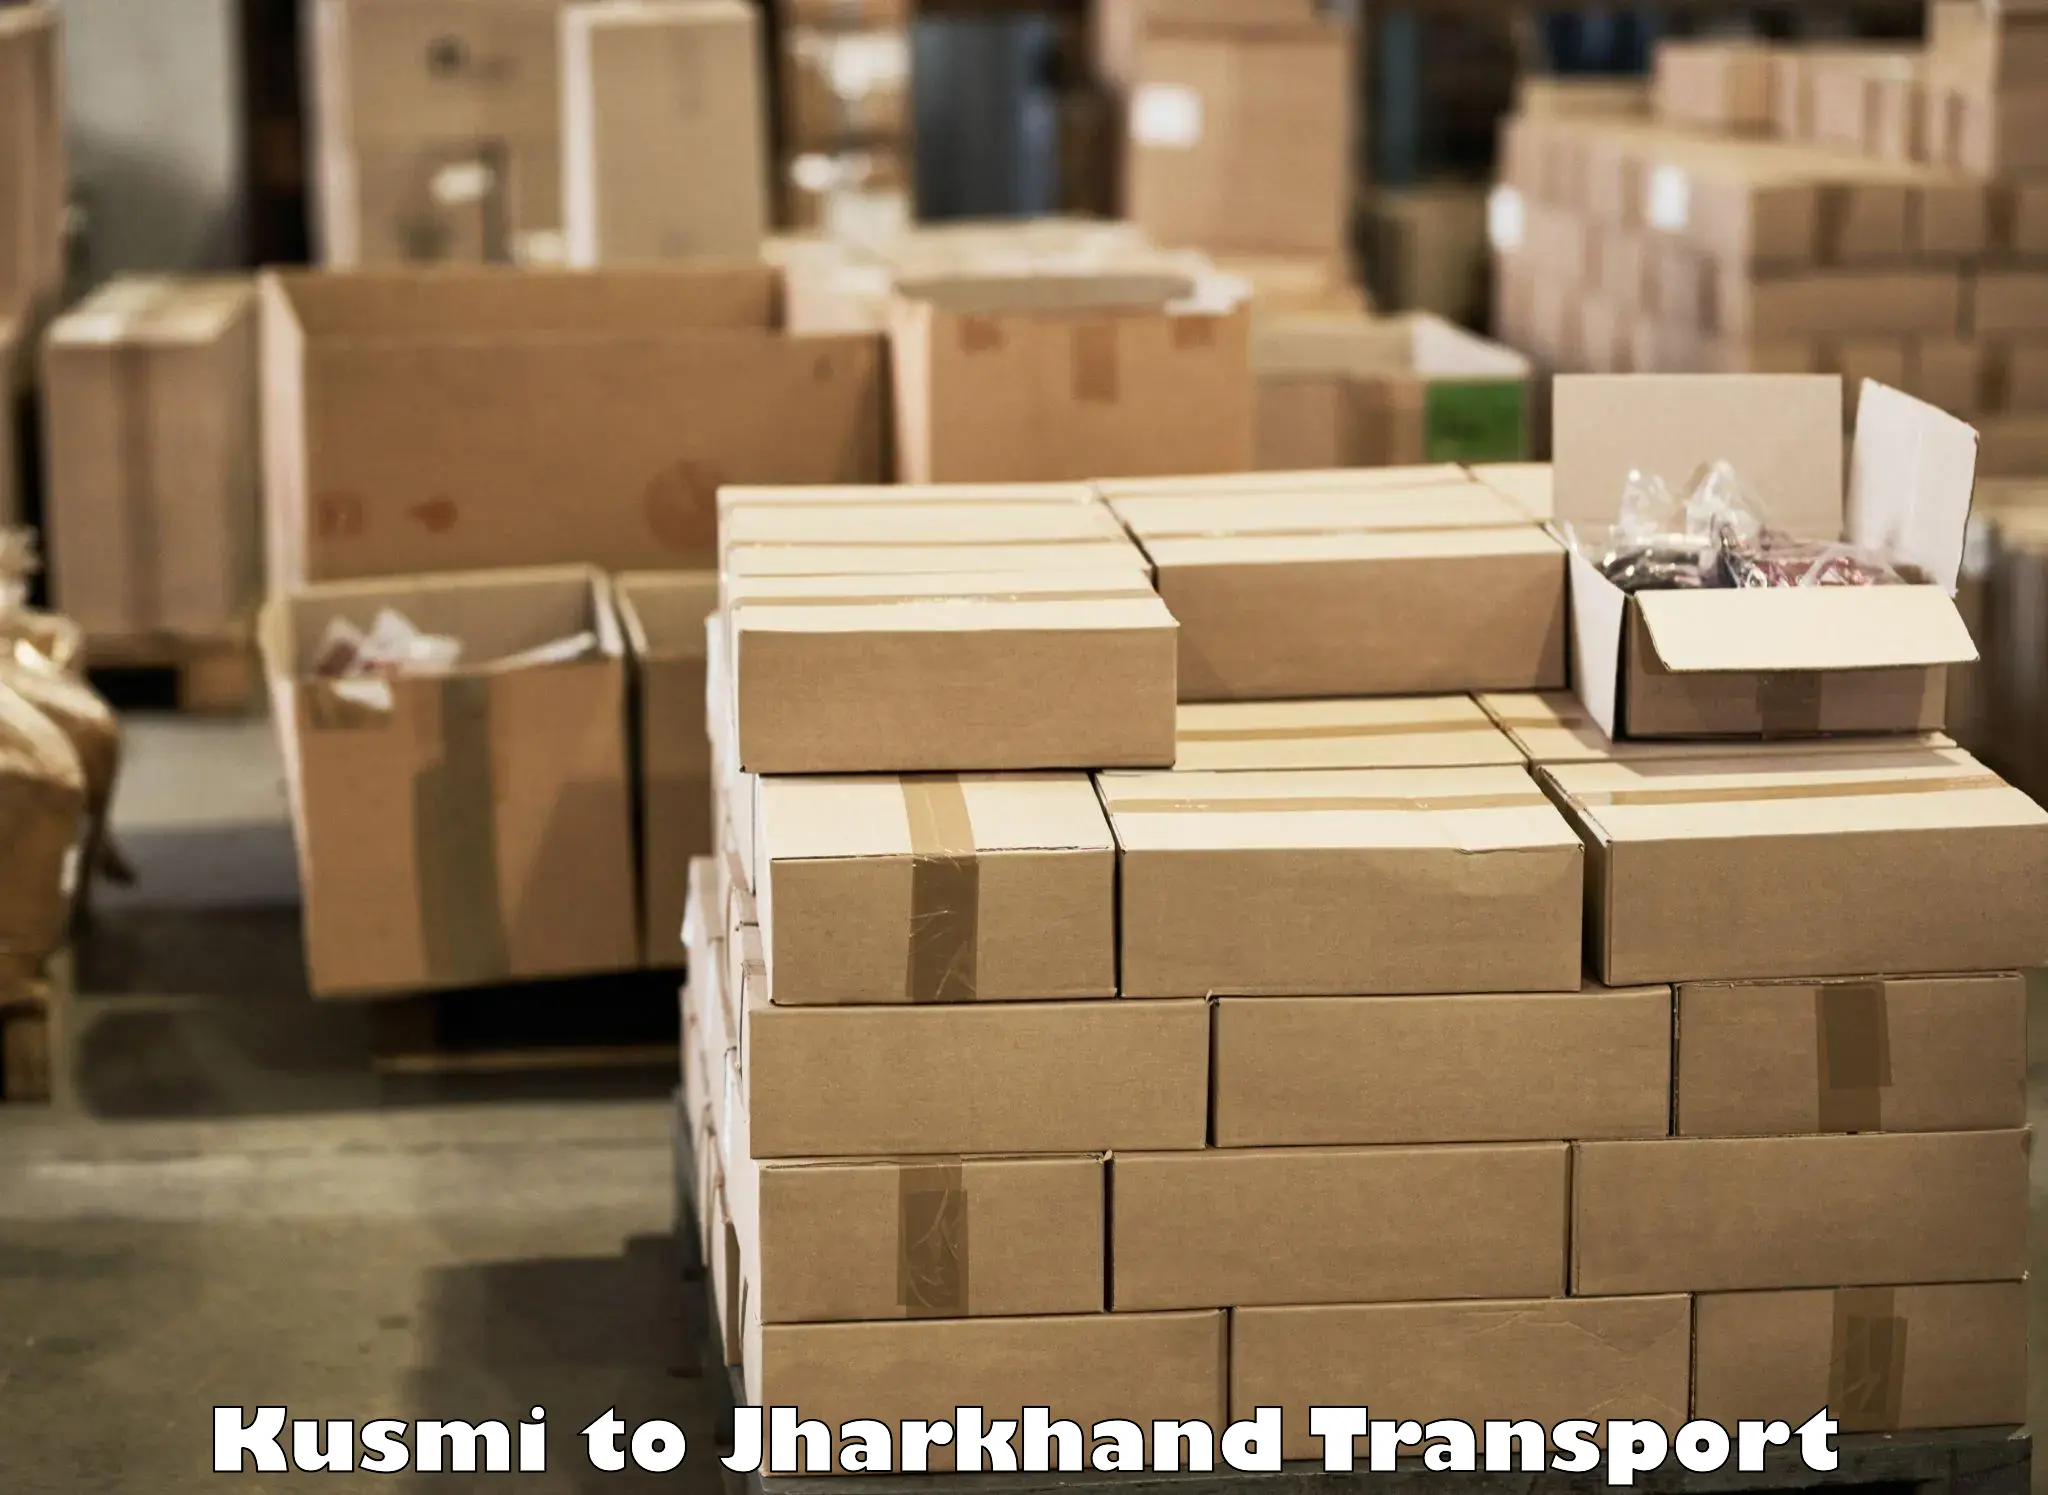 Commercial transport service Kusmi to Ranchi